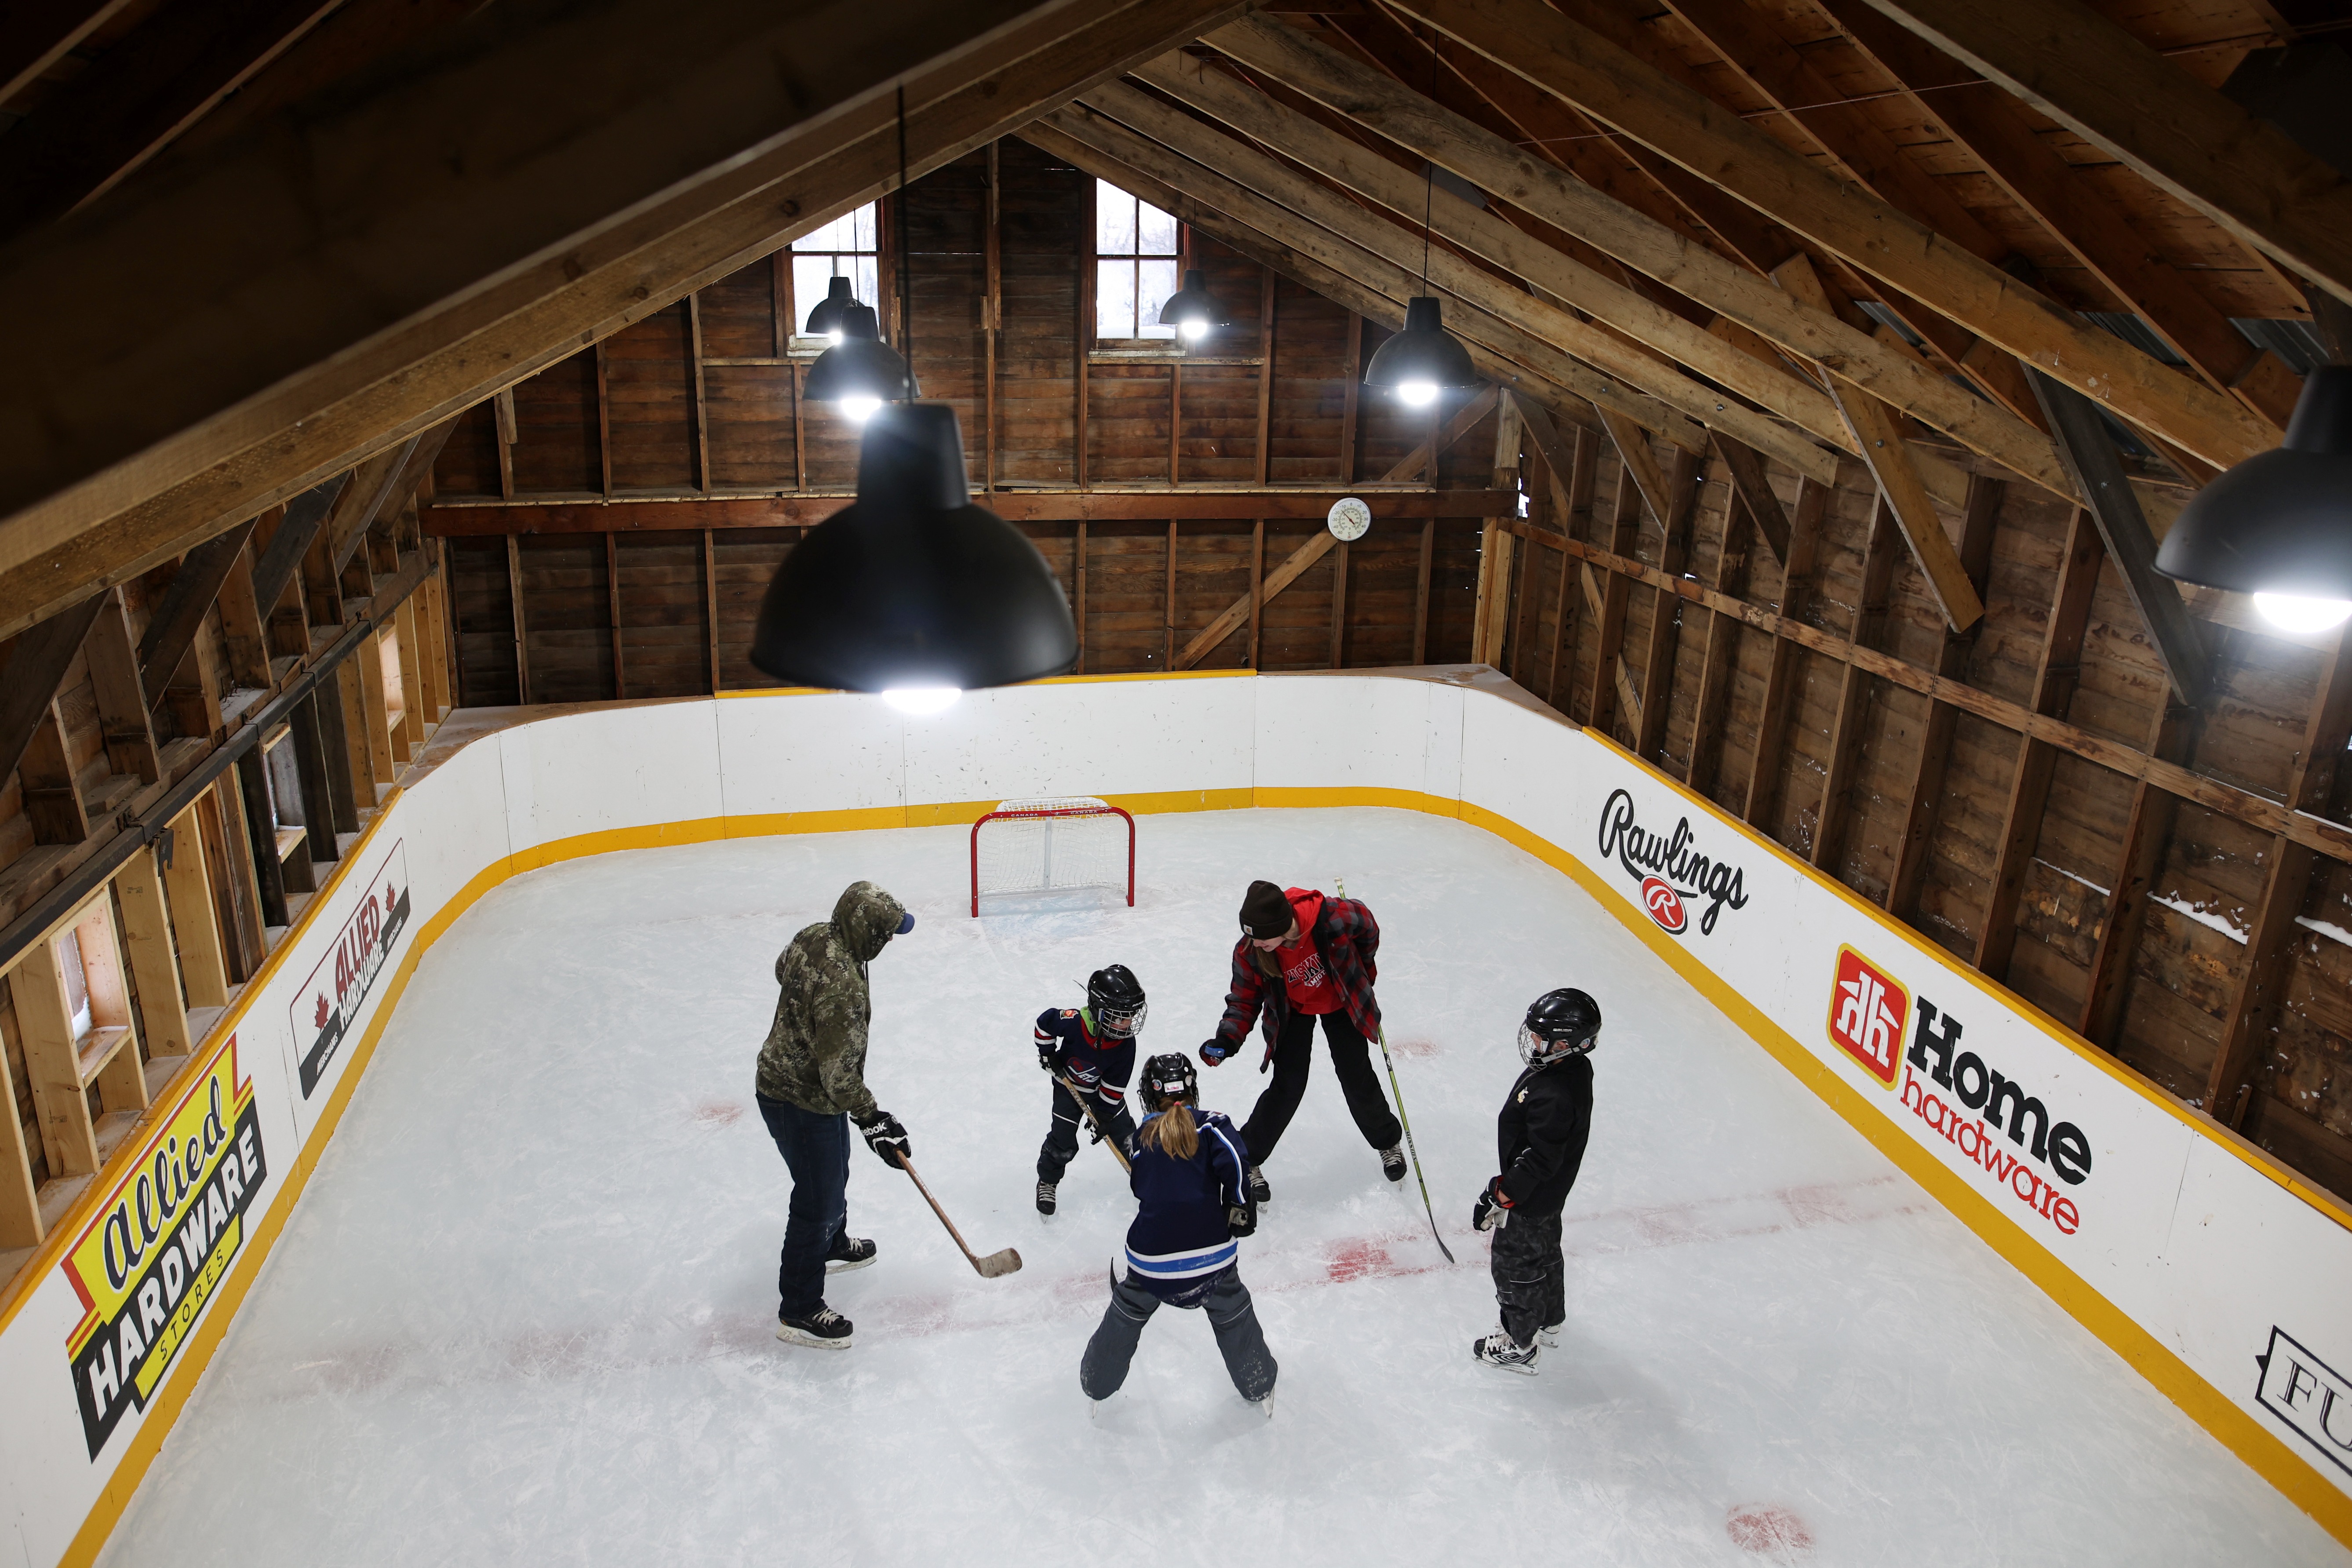 In a sheep barn turned hockey arena, a Manitoba family and friends make their own kind of farm team